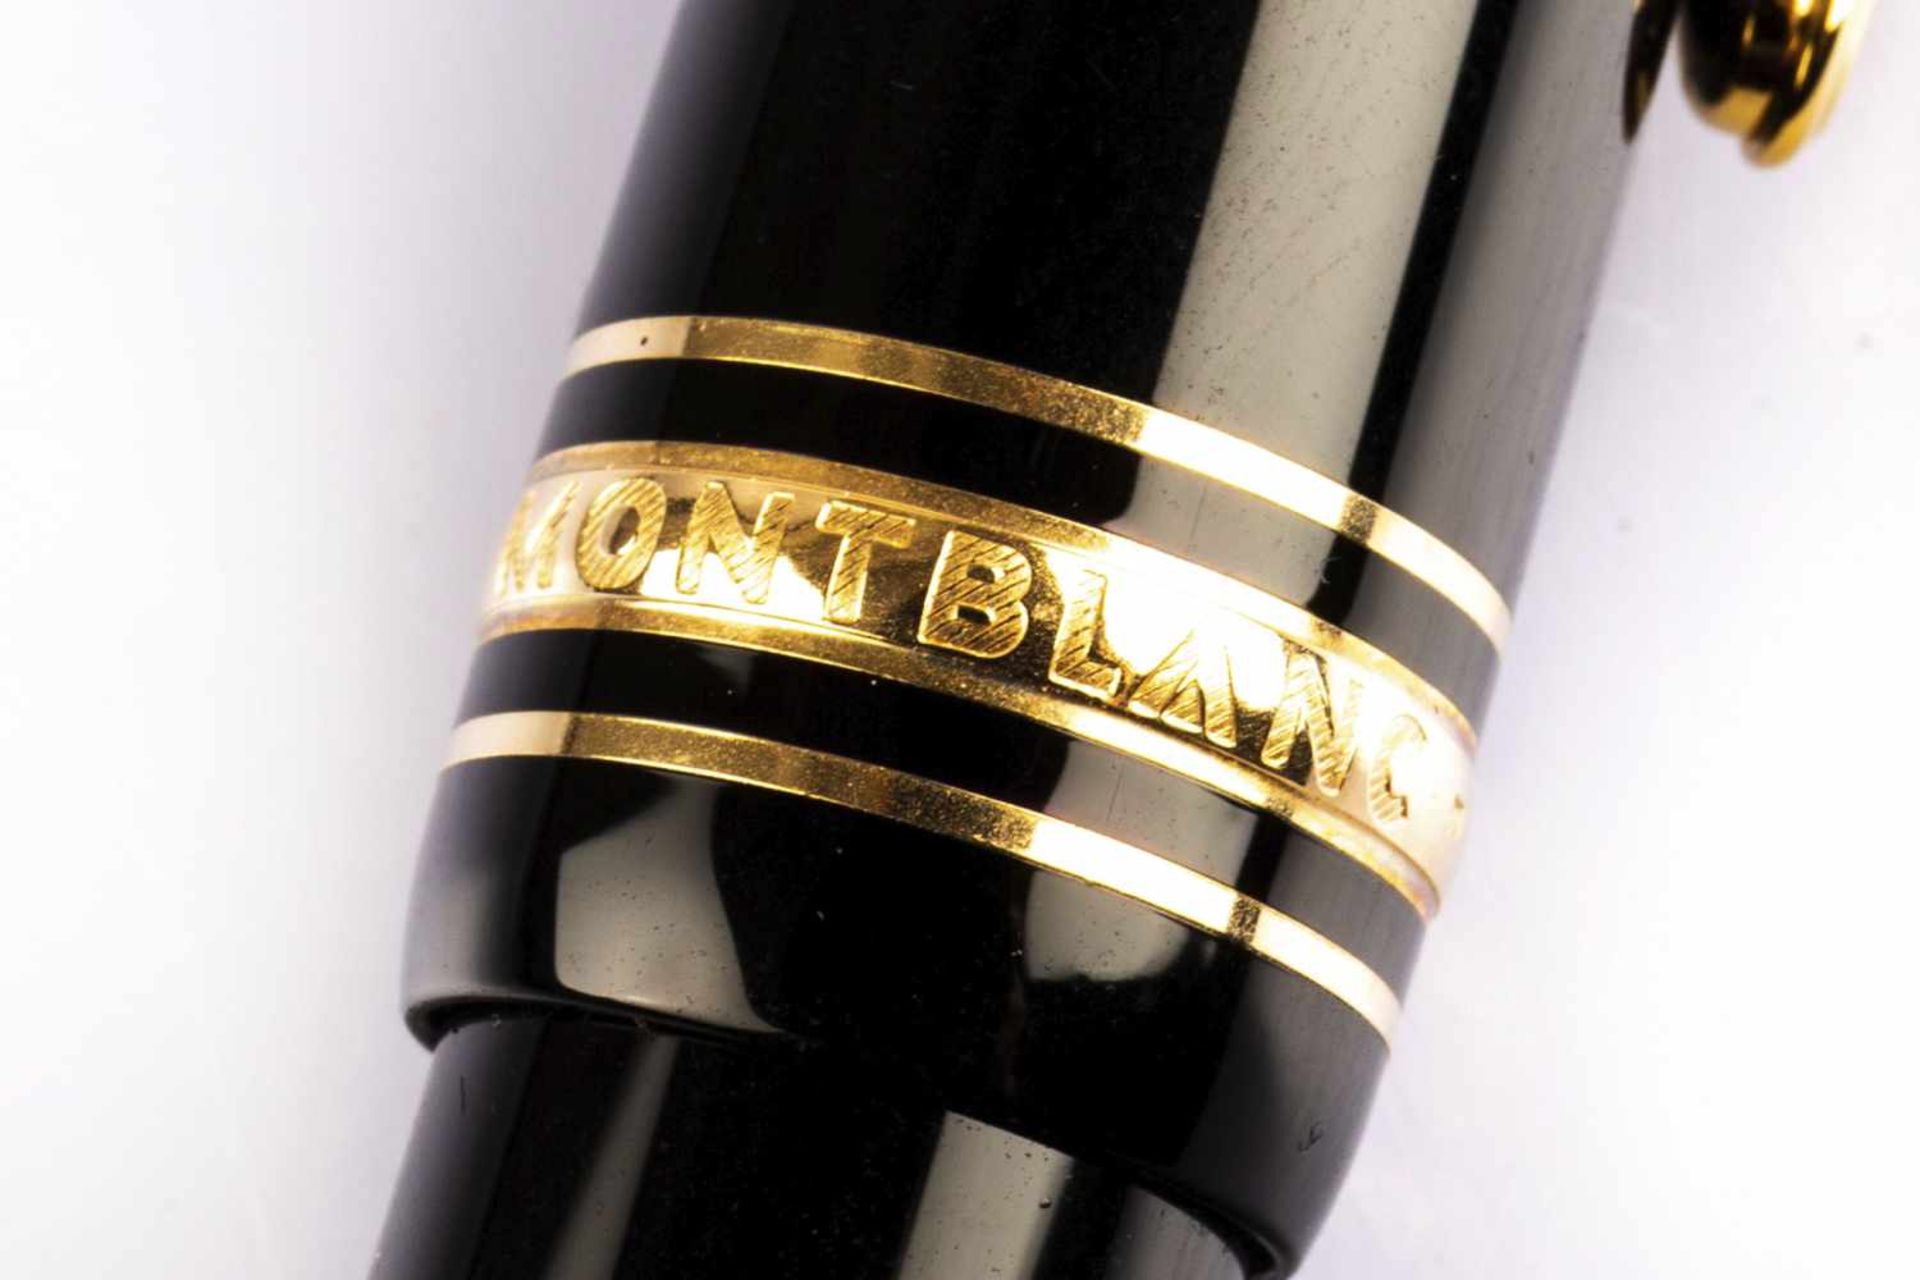 Montblanc 'masterpiece 161 Le Grand' - Image 2 of 5